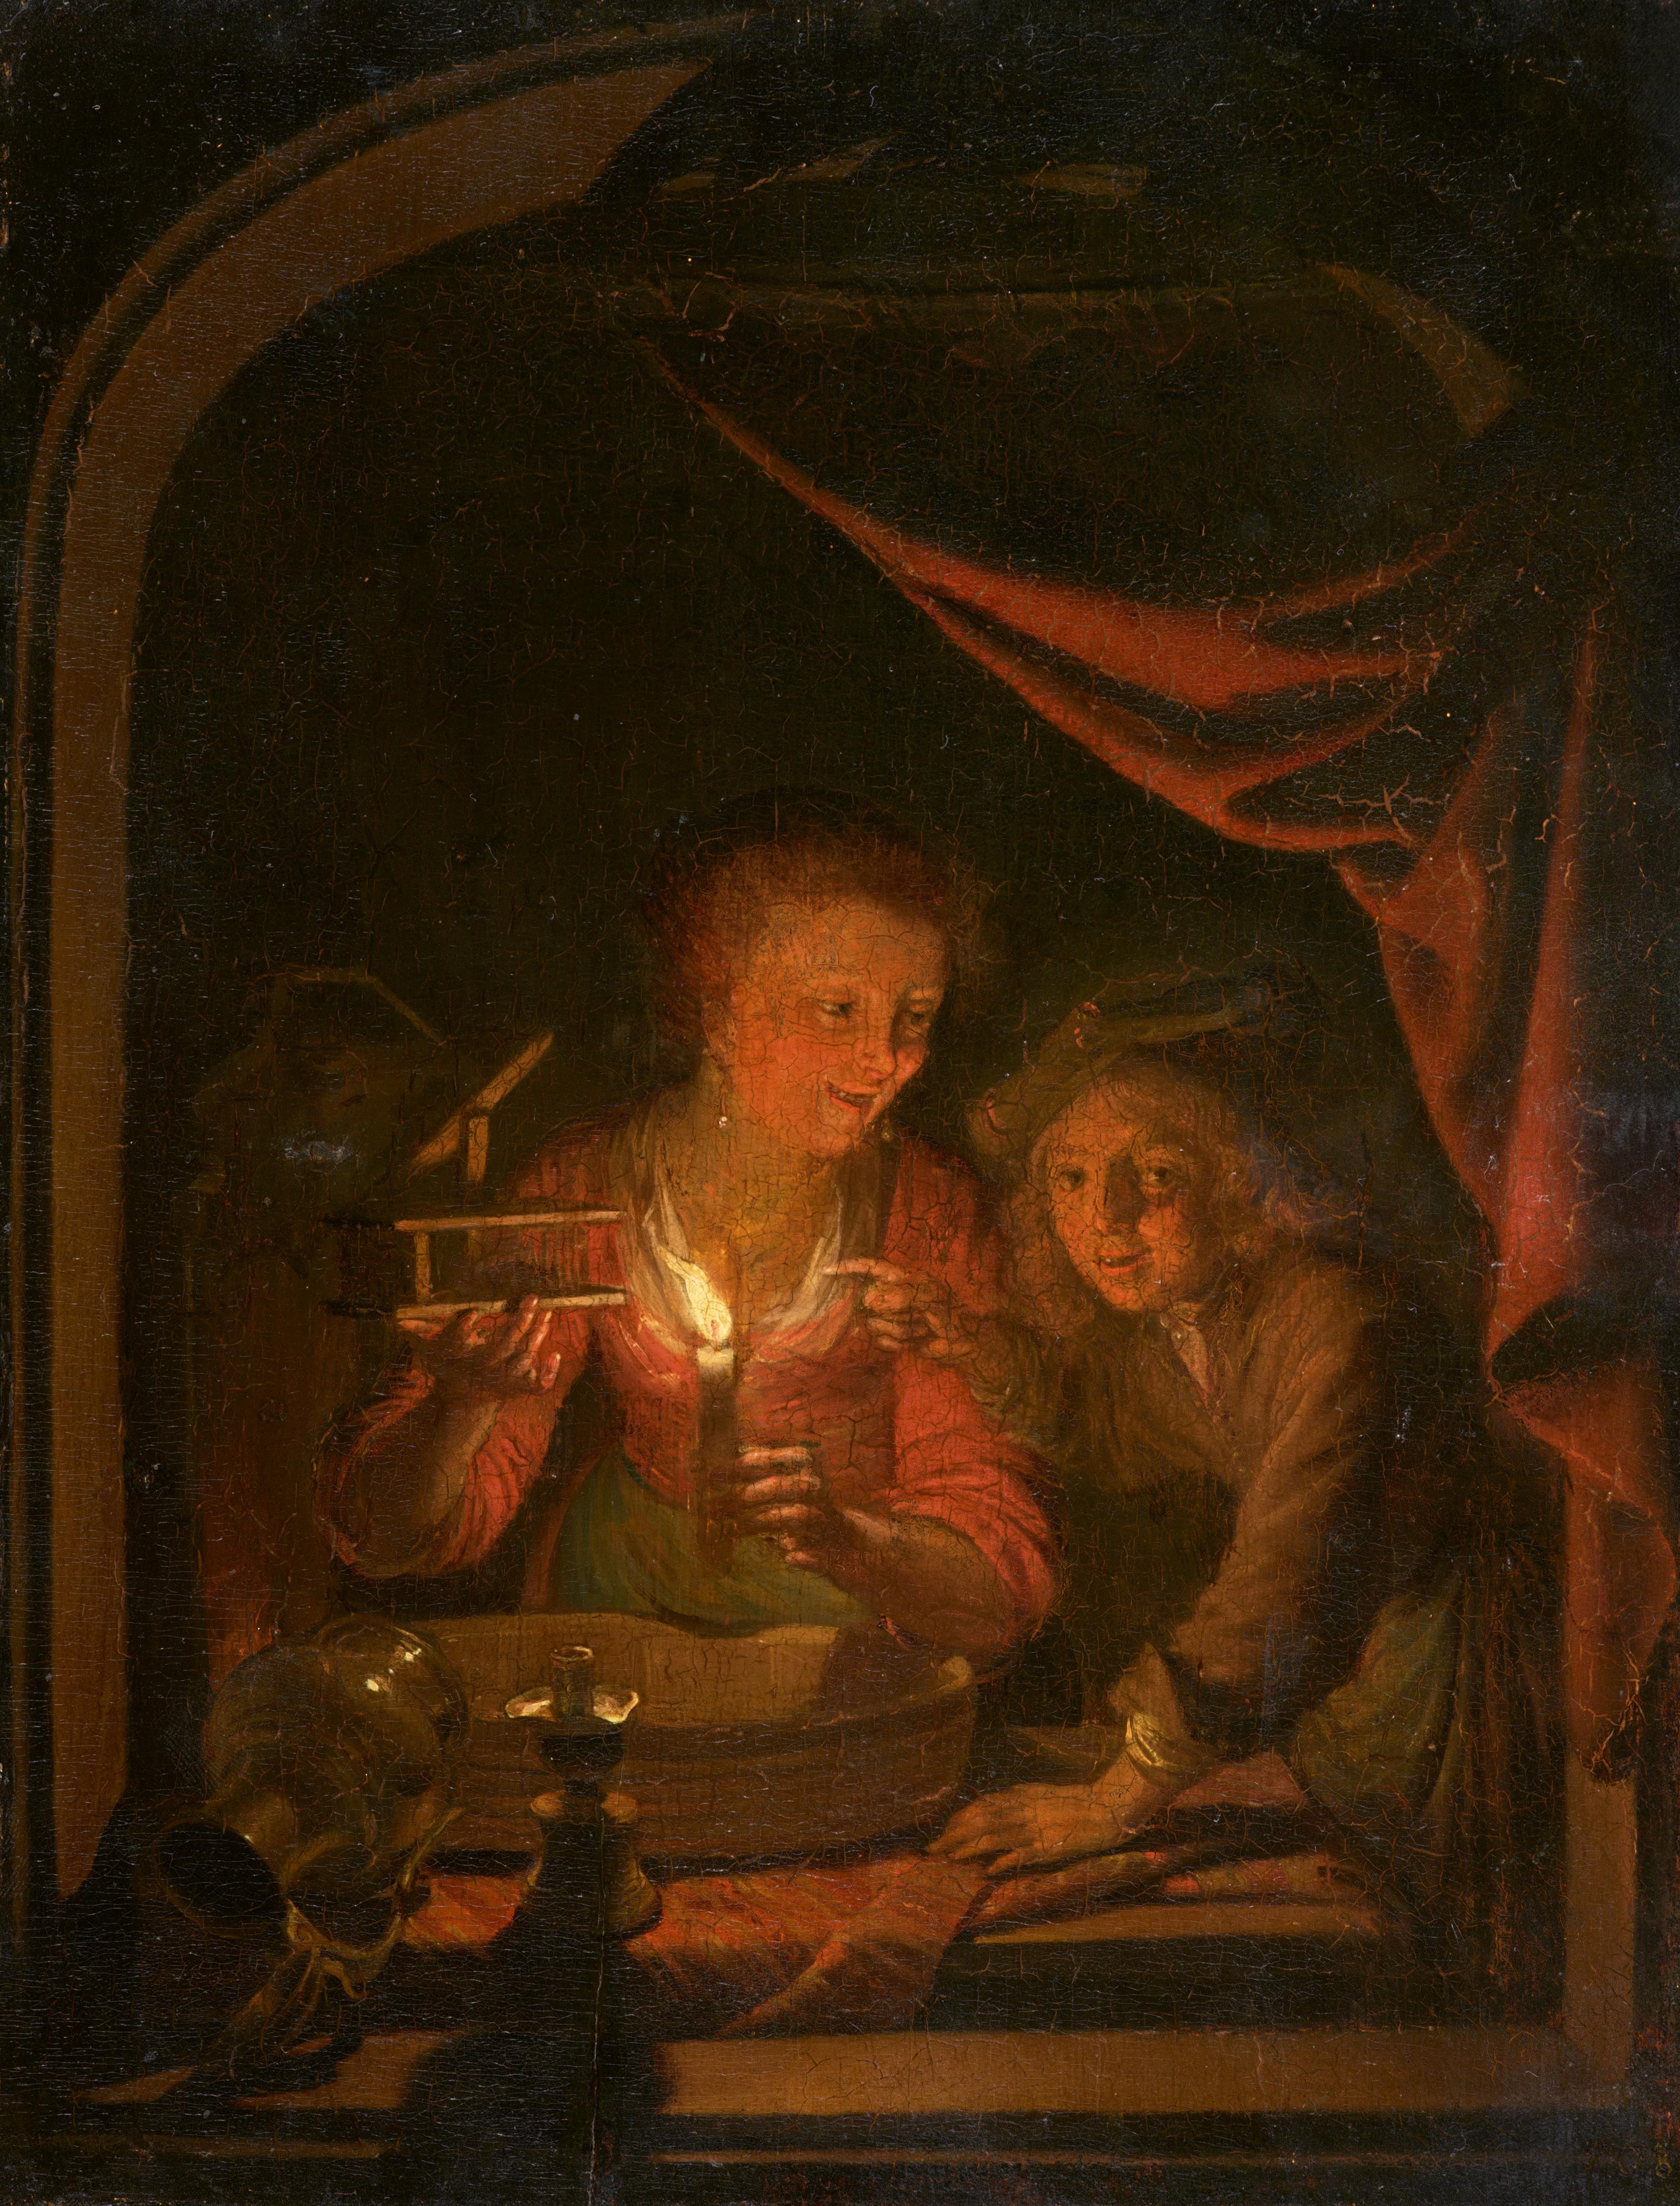 Gerrit Dou, attributed to - The Mousetrap - image-1